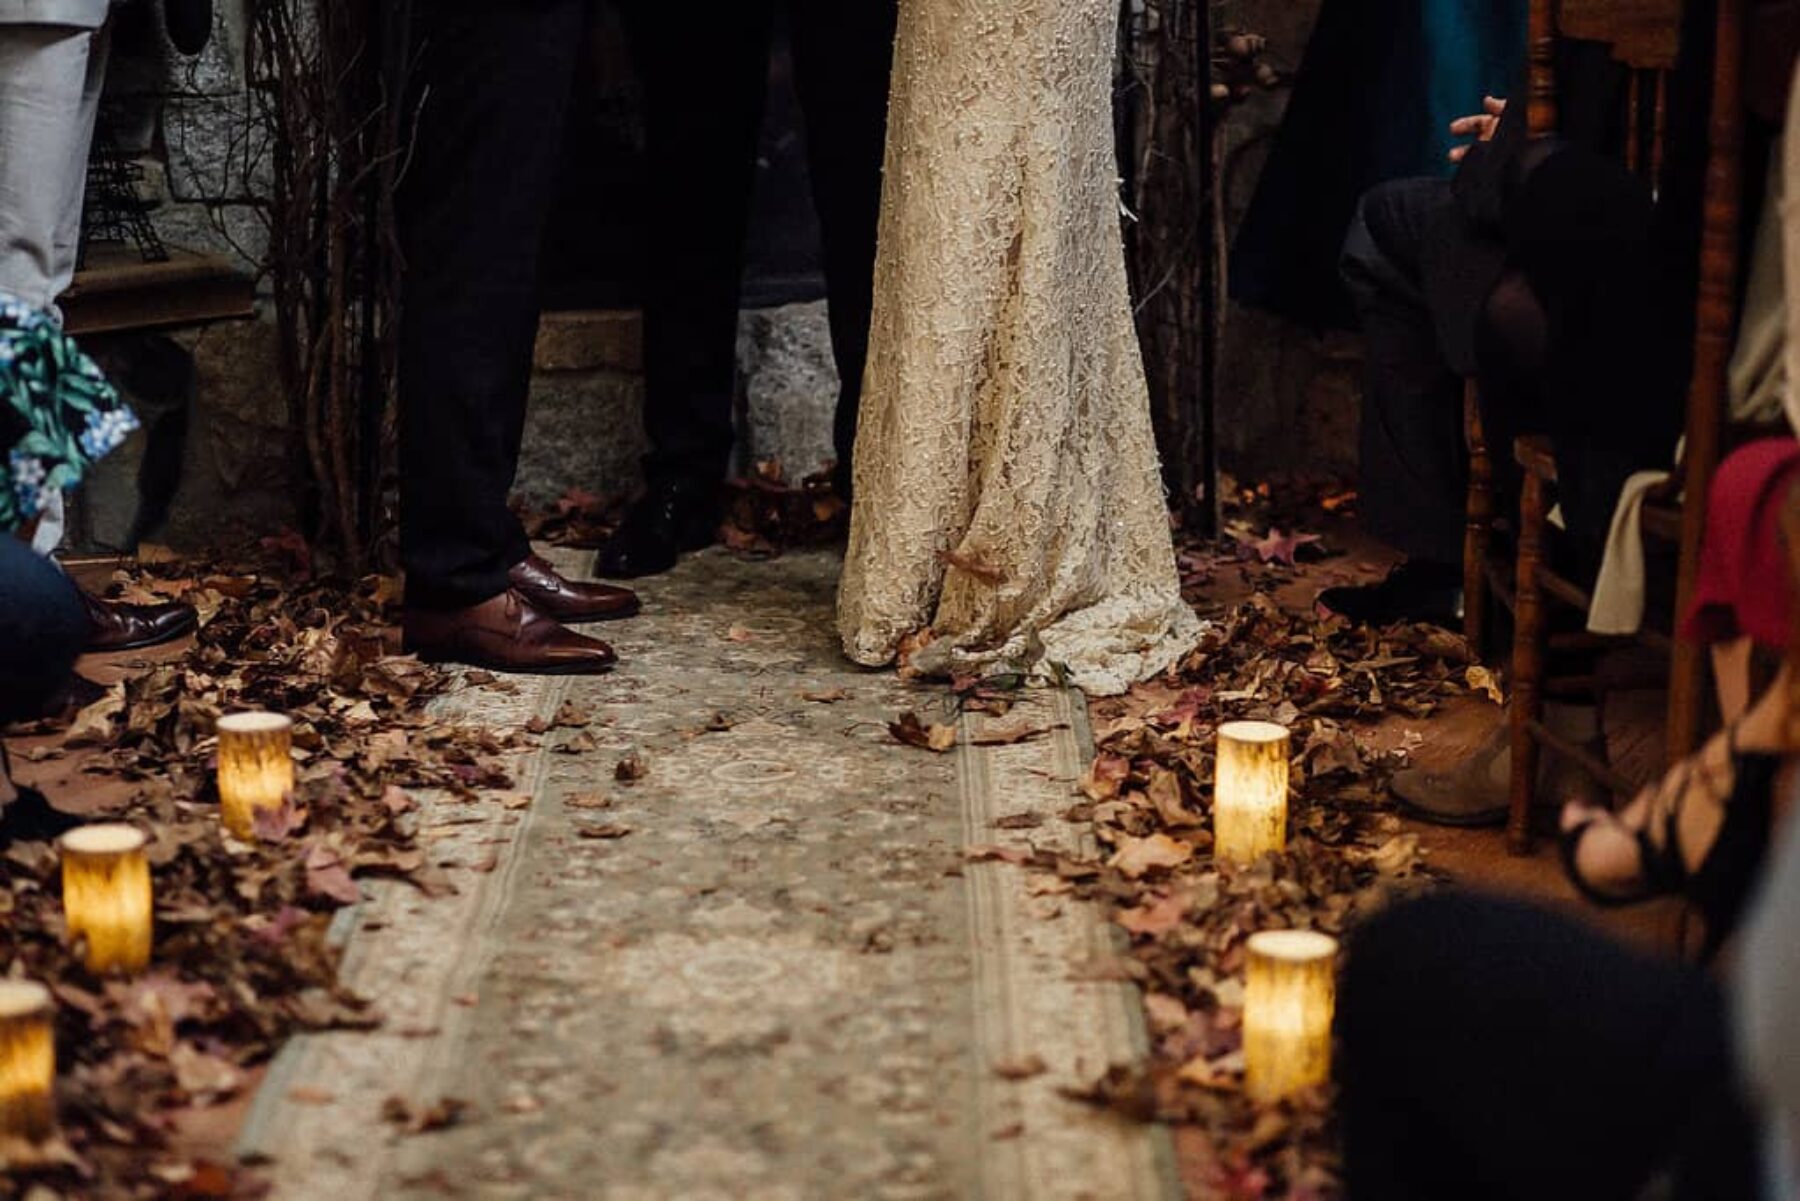 Quirky DIY wedding on a budget - photography by Fiona Vail